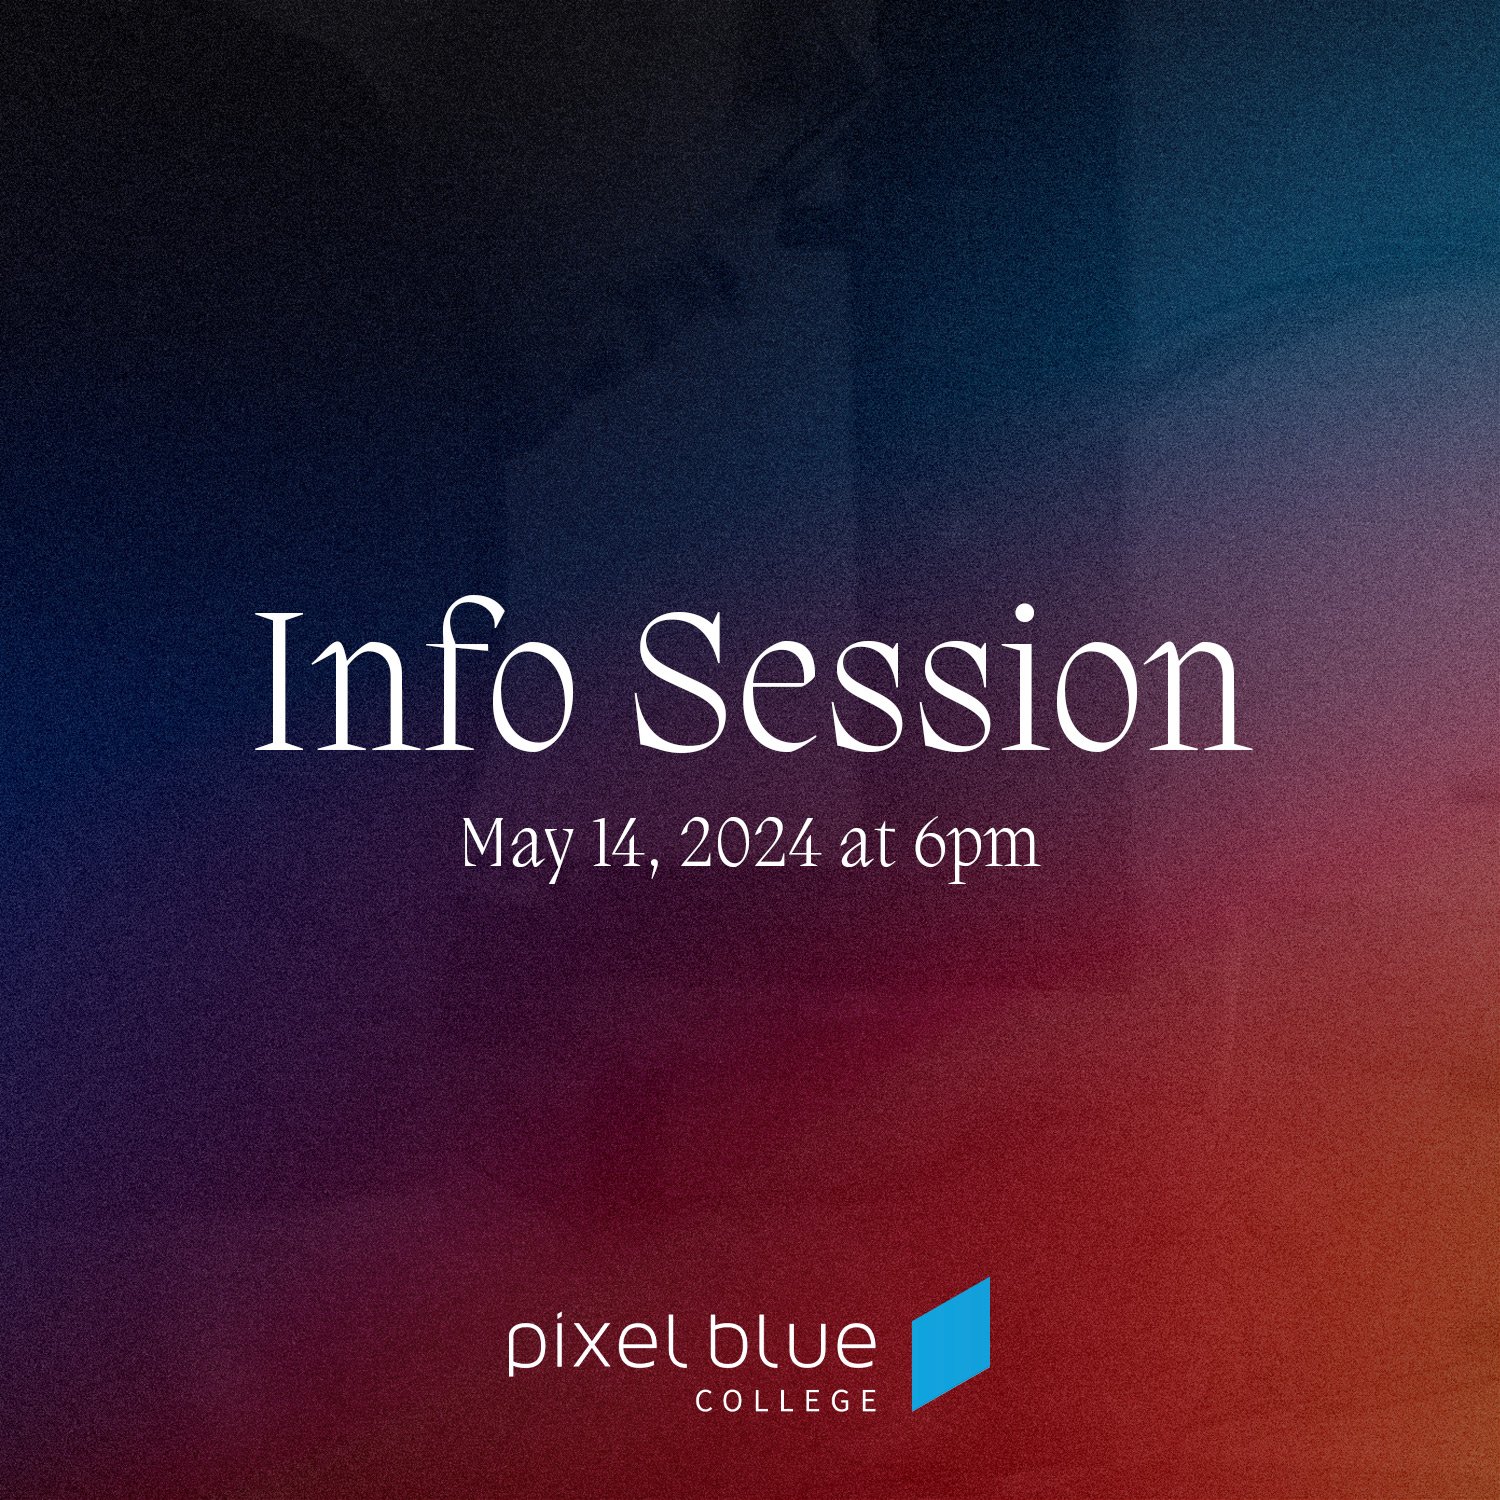 ⏰Join us next week for our 𝗢𝗻𝗹𝗶𝗻𝗲 𝗜𝗻𝗳𝗼 𝗦𝗲𝘀𝘀𝗶𝗼𝗻! Staff and instructors will be available to answer all of your questions and provide more info about our programs to see if Pixel Blue is the right fit! ⚡ If you're interested in startin